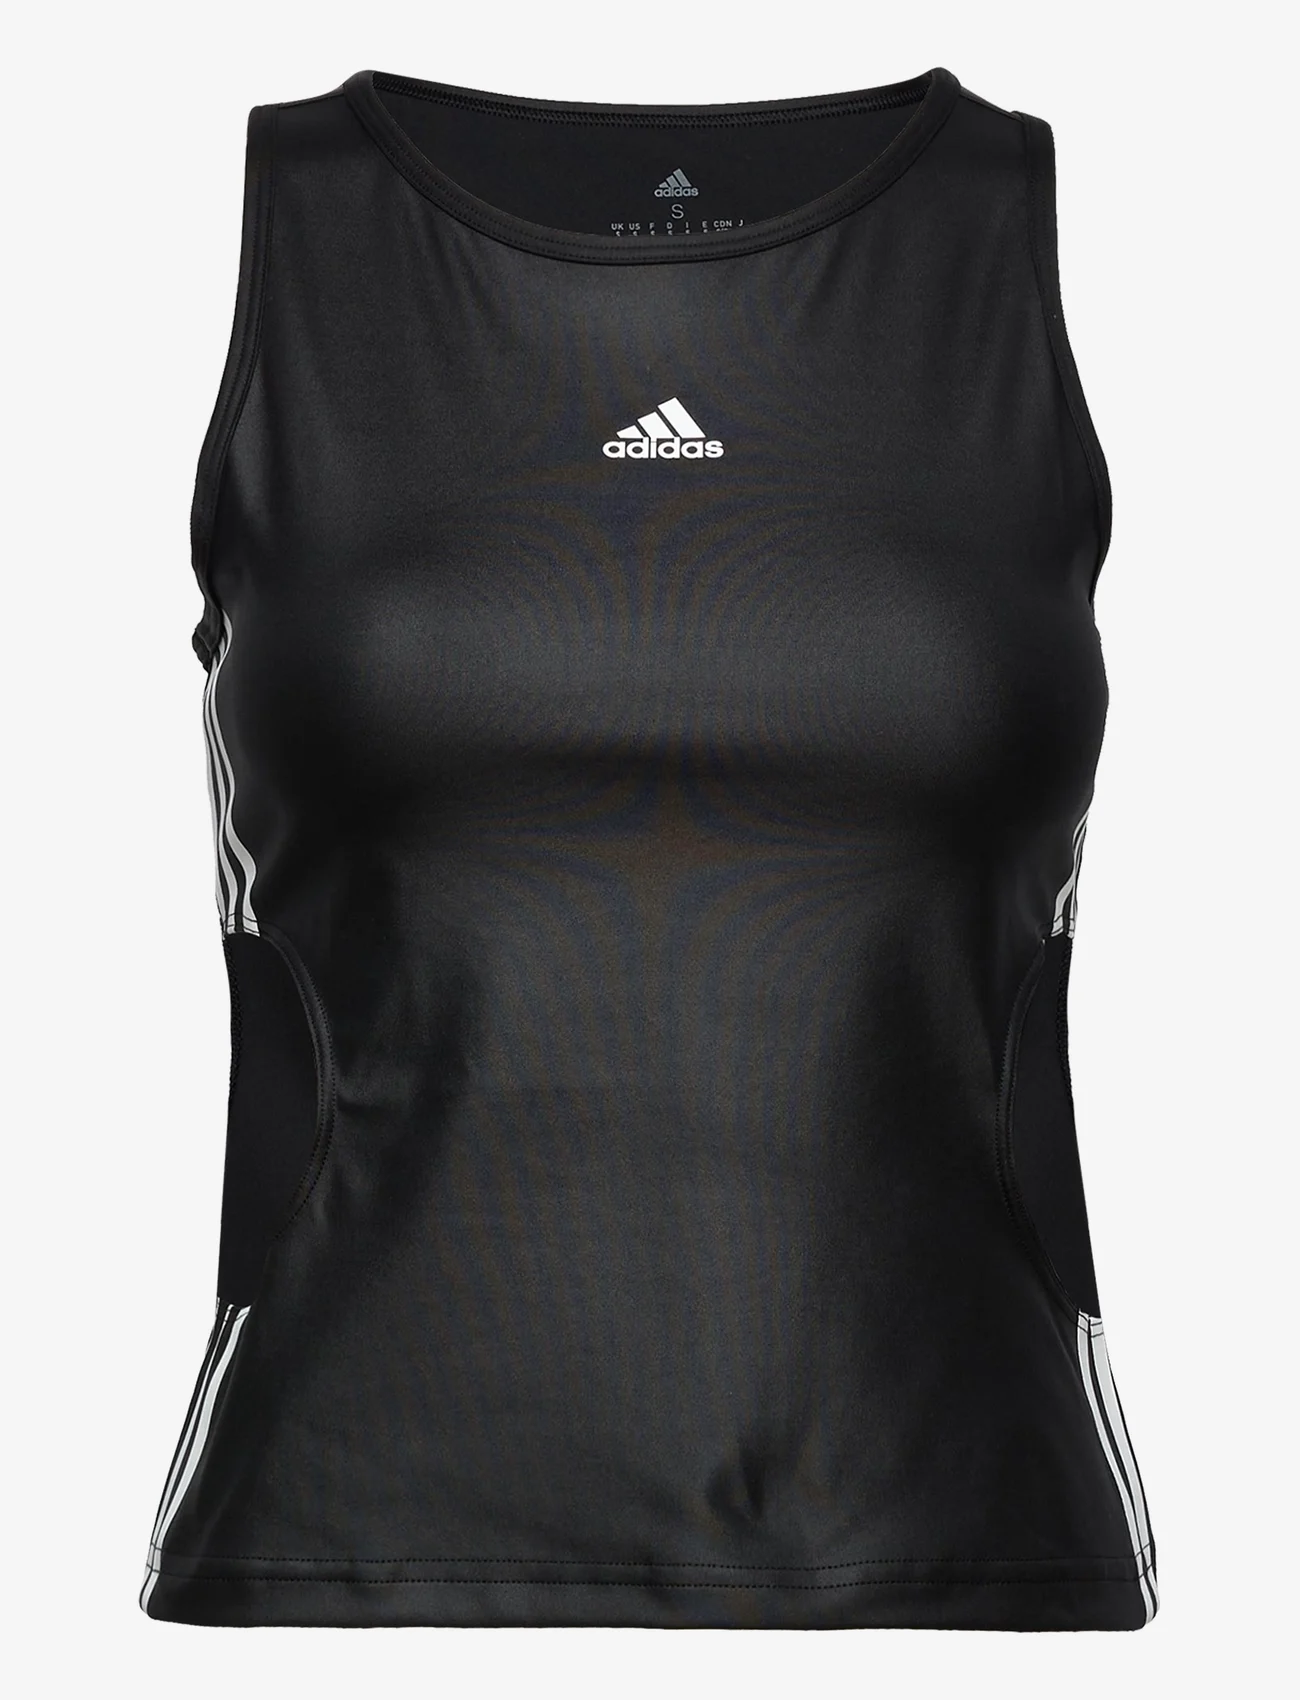 adidas Performance - Hyperglam Fitted Tank Top With Cutout Detail - zemākās cenas - black/white - 0